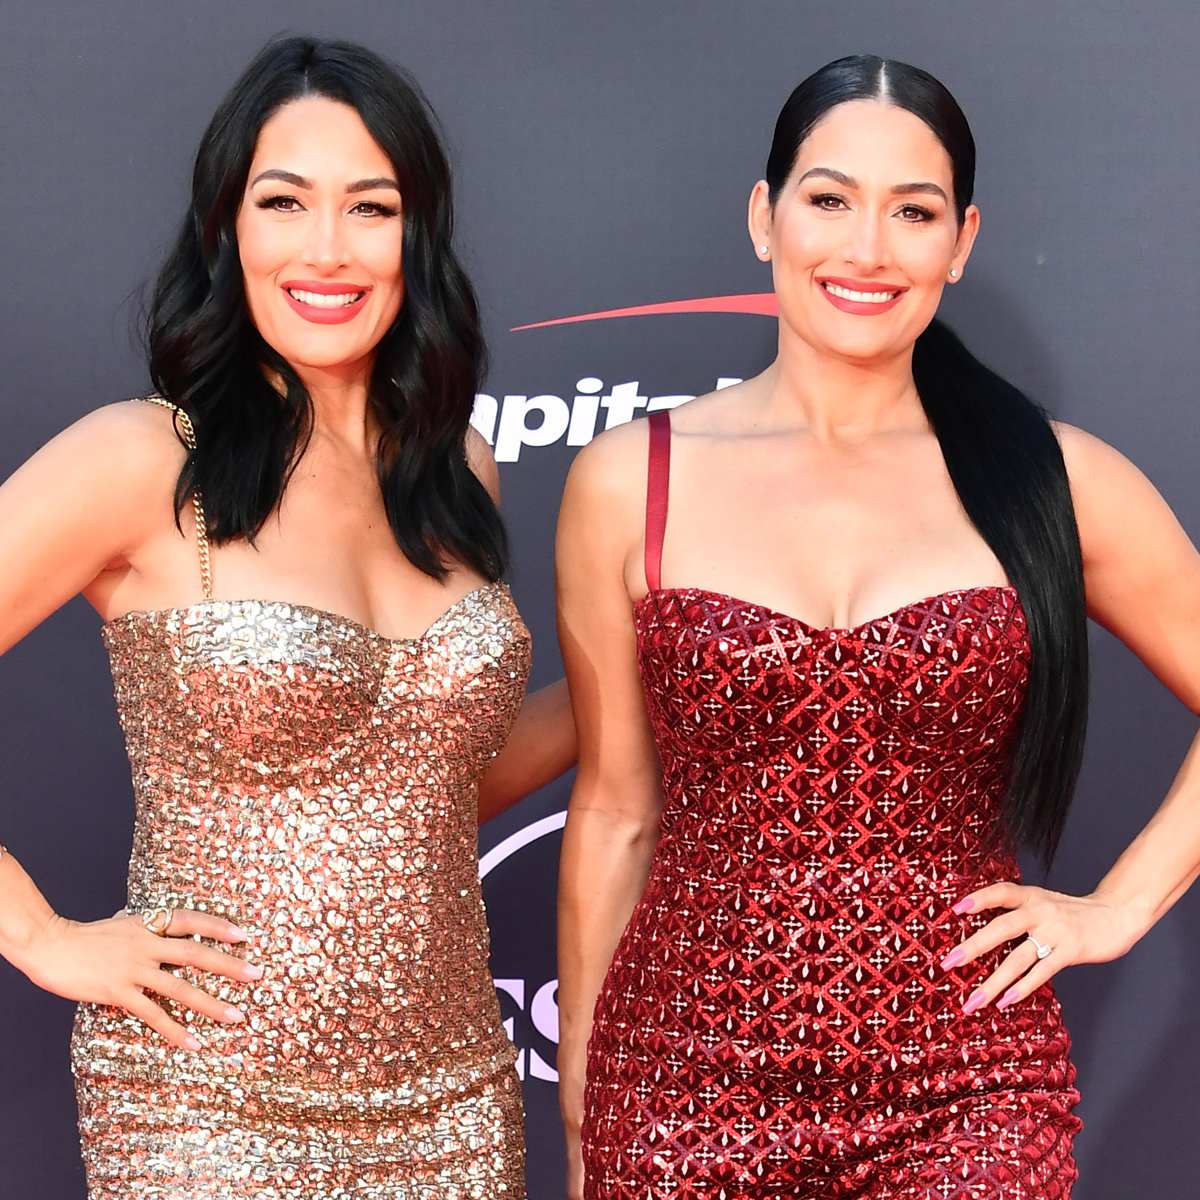 Nikki & Brie Garcia On Red Carpets: Photos Of Their Hottest Looks